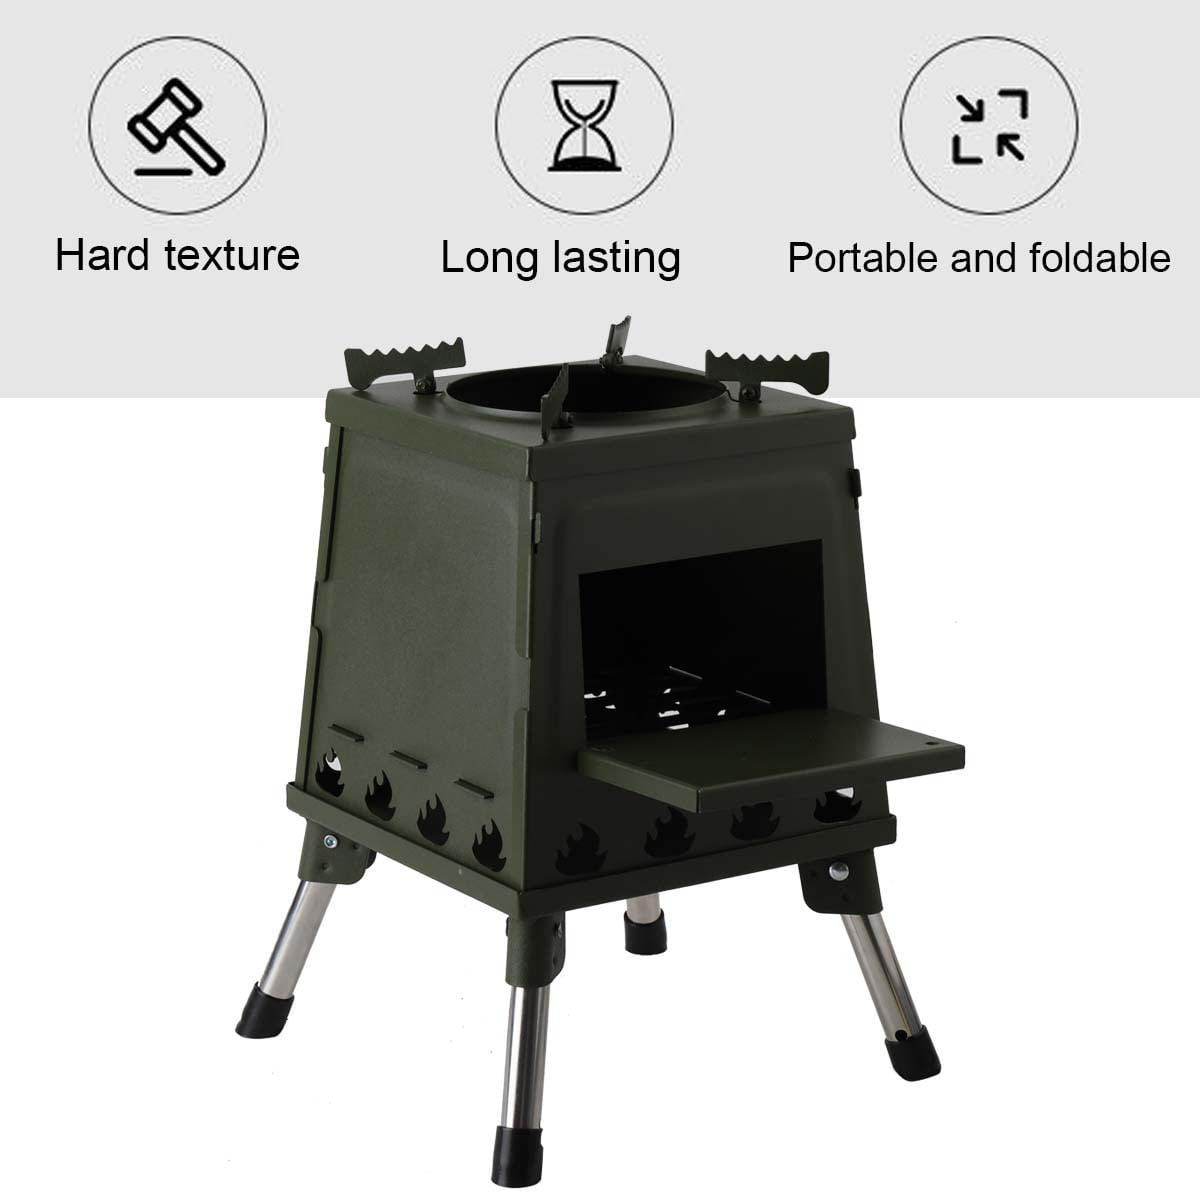 YILIKISS Wood Burning Stove Portable Cooker Camping Cooking Stove Hiking Outdoor Survival